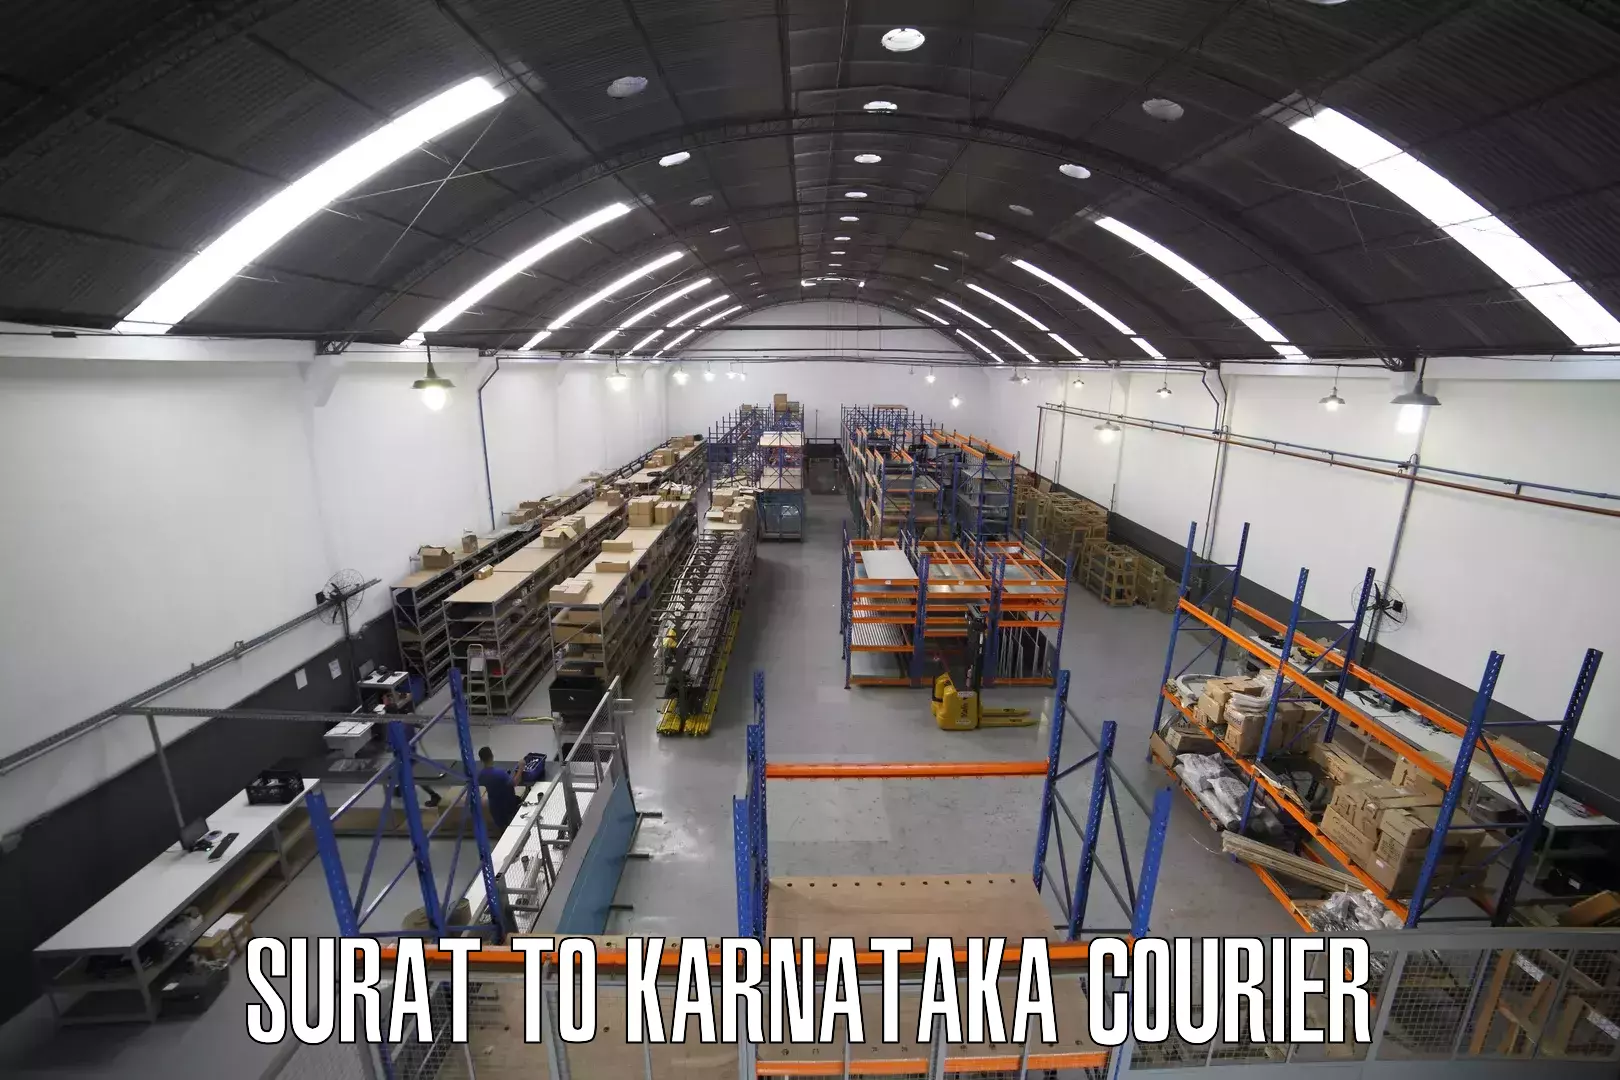 State-of-the-art courier technology Surat to Mysore